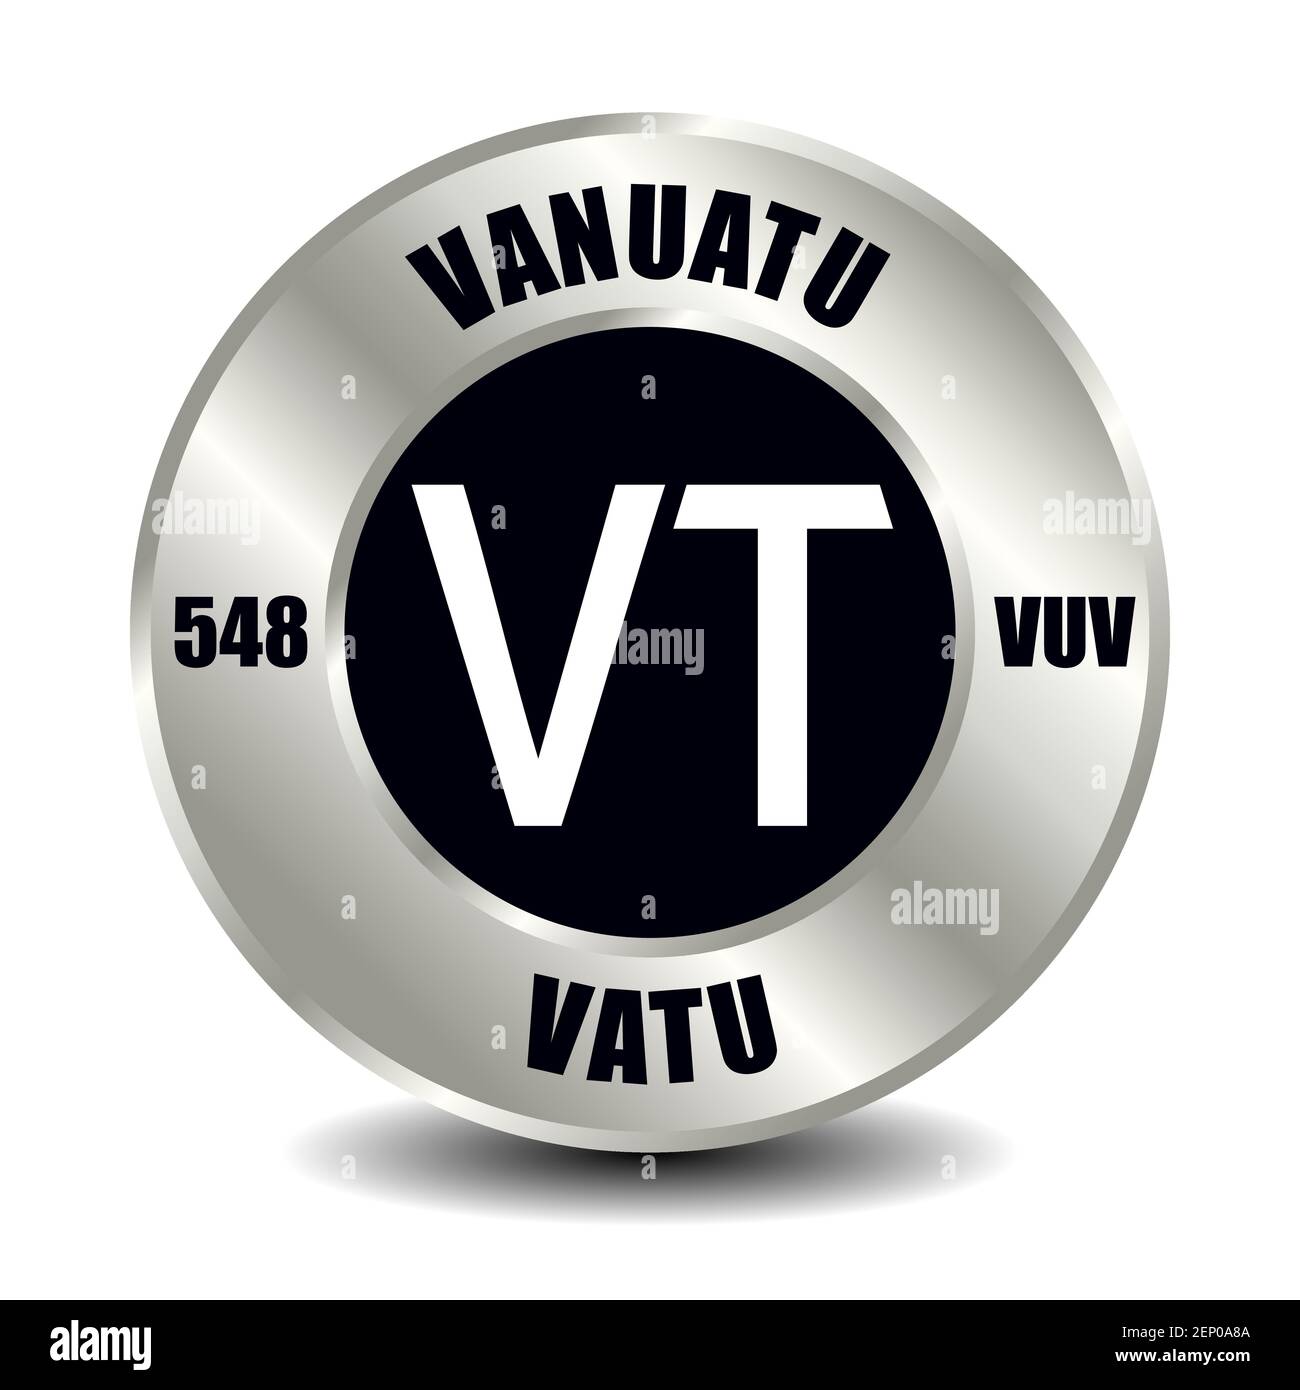 Vanuatu money icon isolated on round silver coin. Vector sign of currency symbol with international ISO code and abbreviation Stock Vector